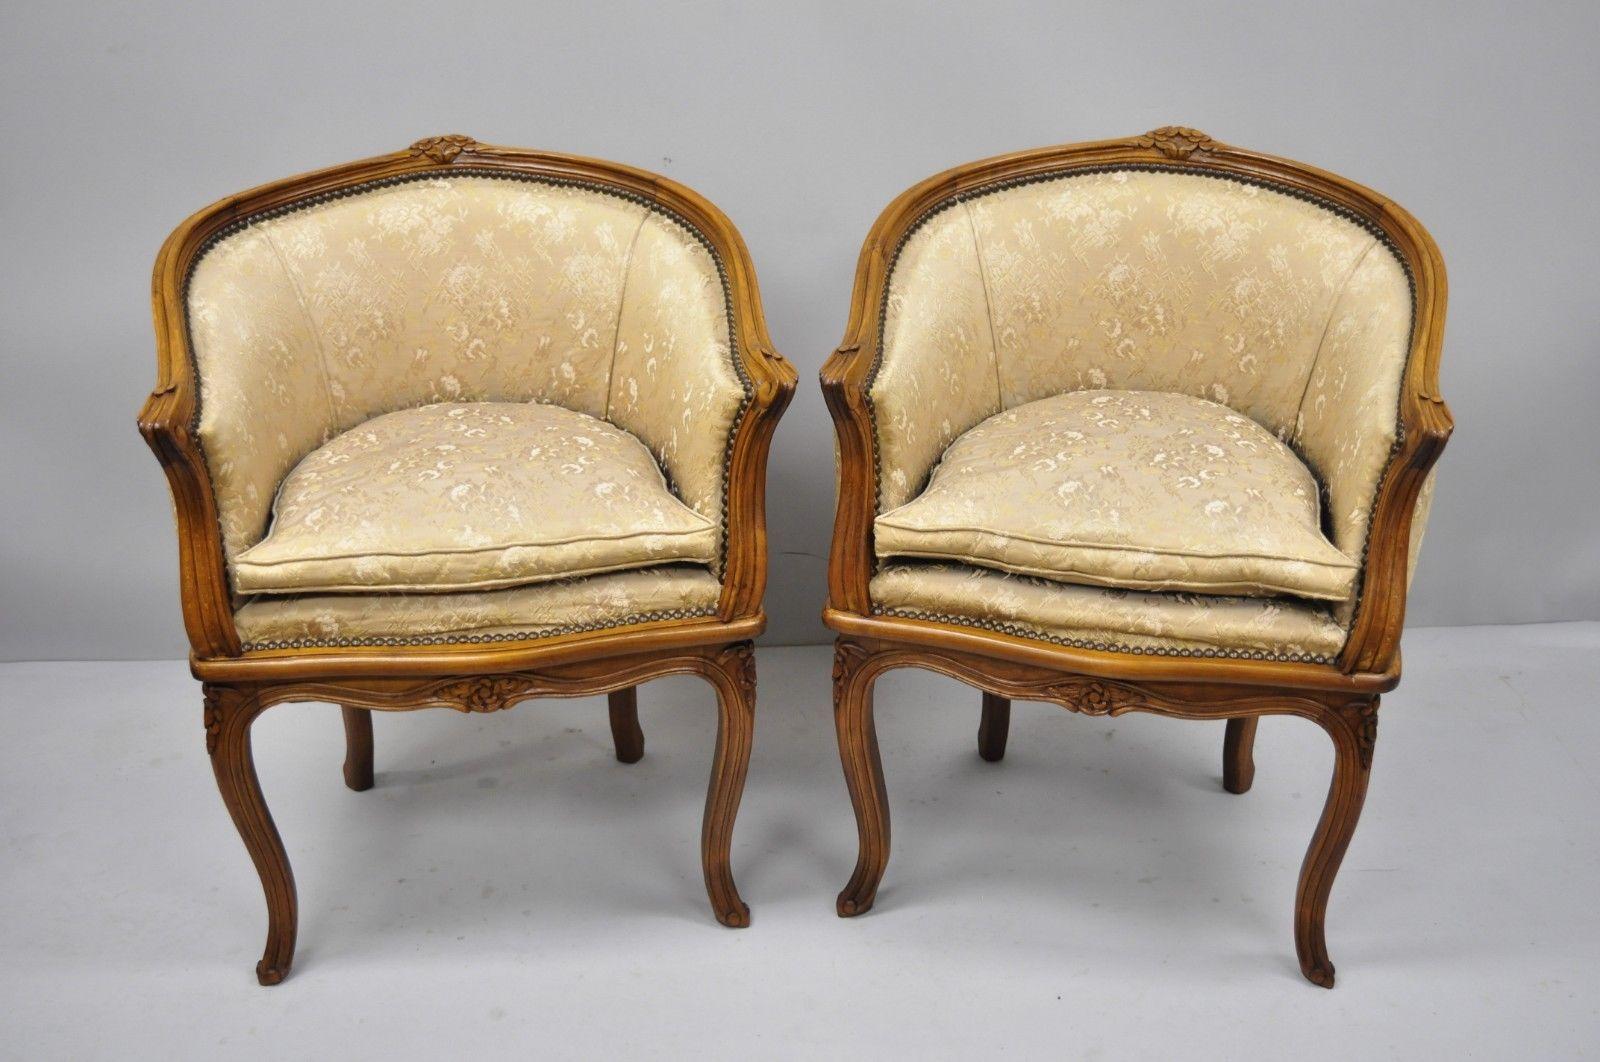 Pair of French Louis XV Style carved walnut barrel back boudoir chairs. Item features shapely barrel backs, pillow cushions, solid walnut construction, finely carved details, and cabriole legs; great style and form, circa early 20th century.